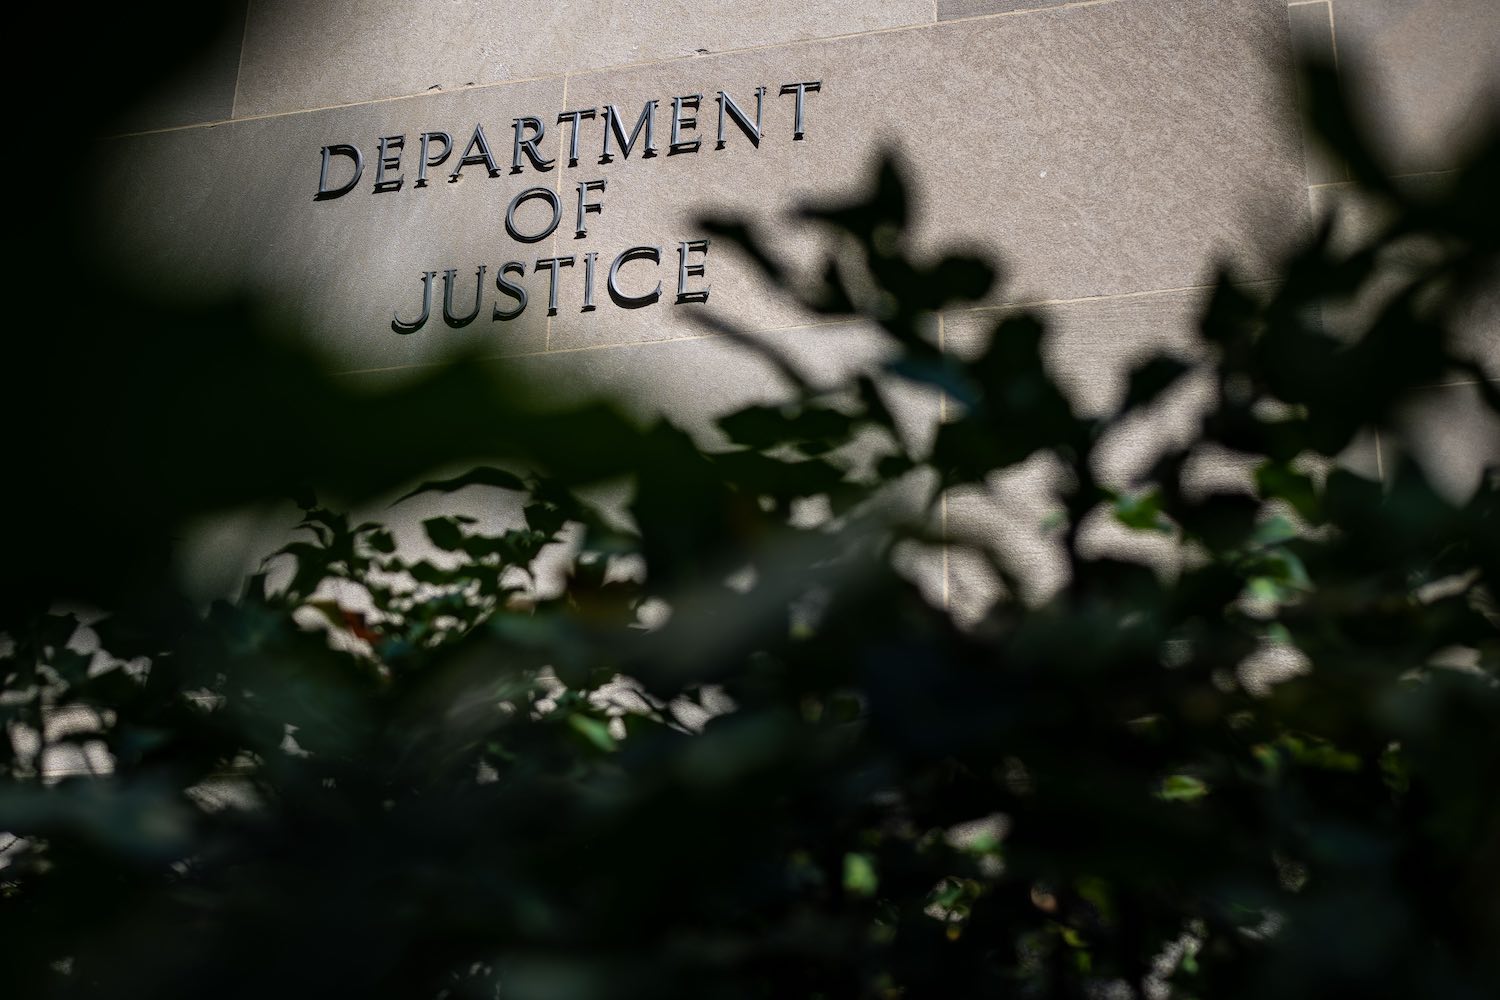 The "Department of Justice" sign on the side of the DOJ building in DC